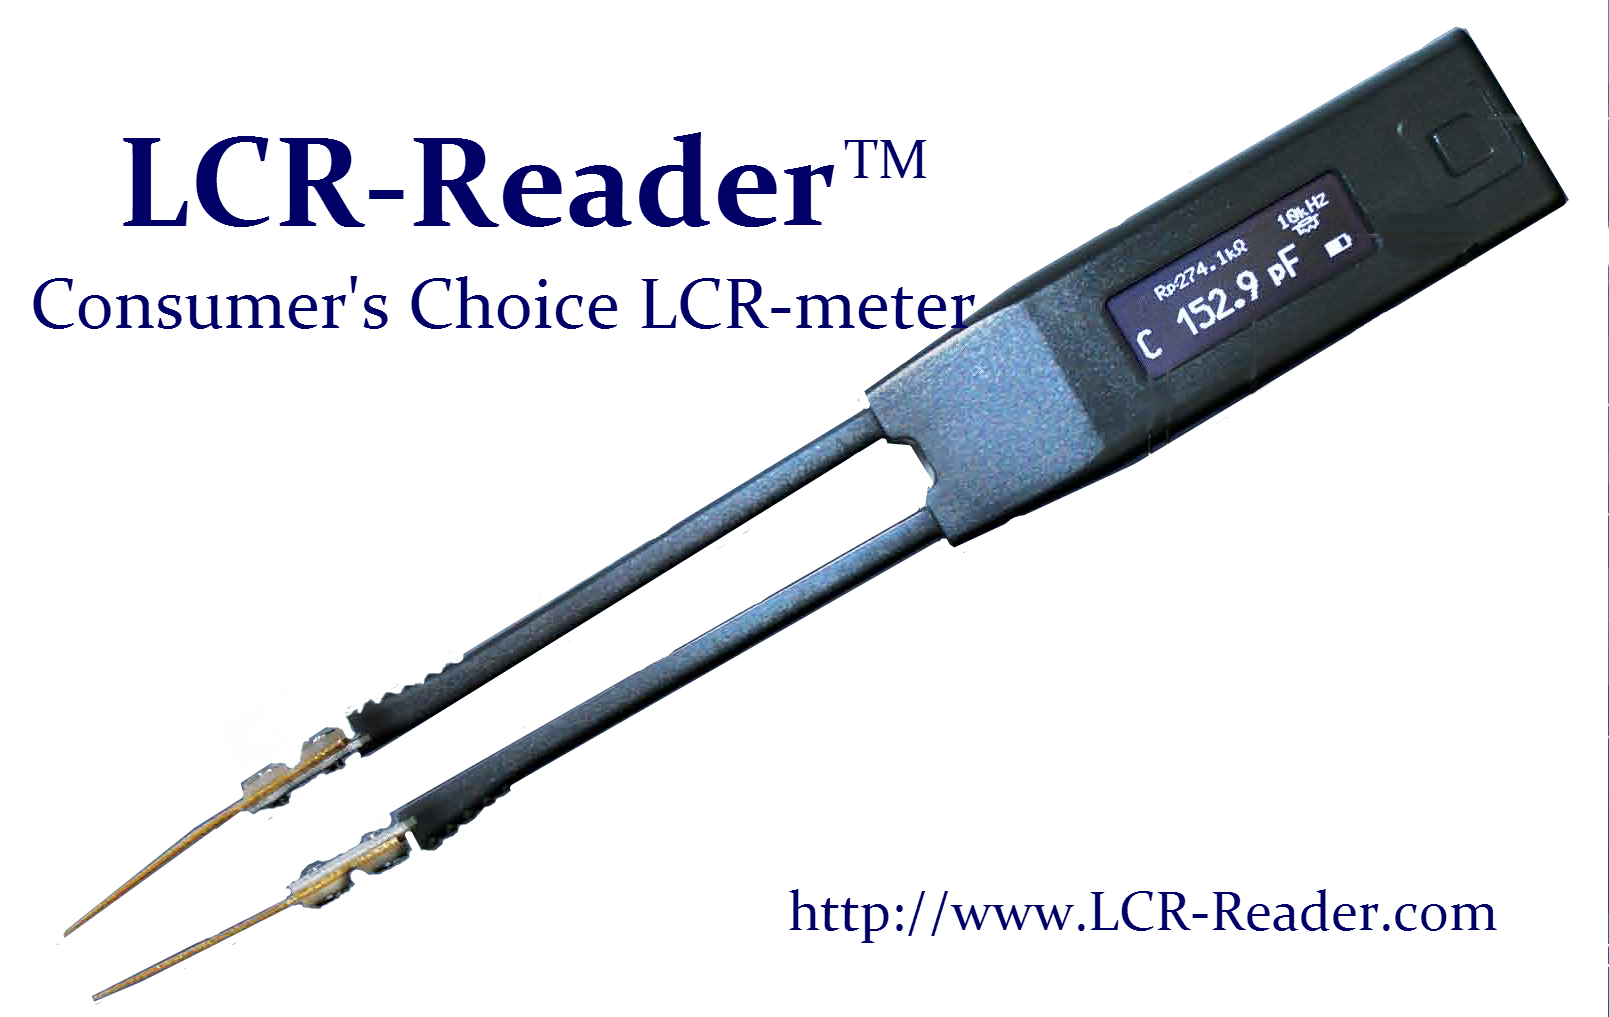 LCR-Reader: the Consumer's Choice LCR-meter